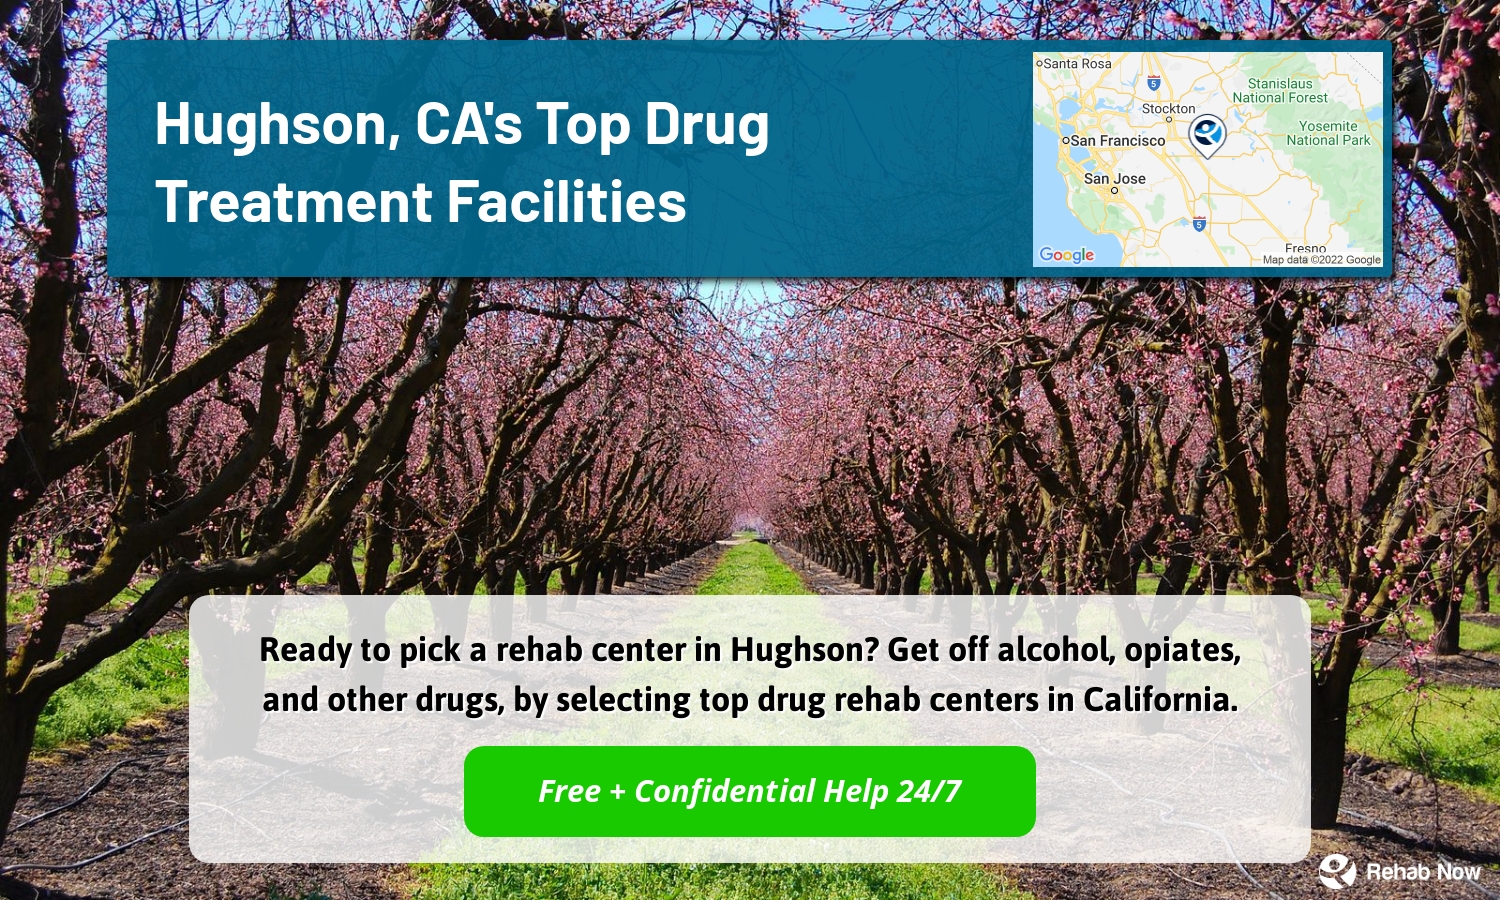 Ready to pick a rehab center in Hughson? Get off alcohol, opiates, and other drugs, by selecting top drug rehab centers in California.